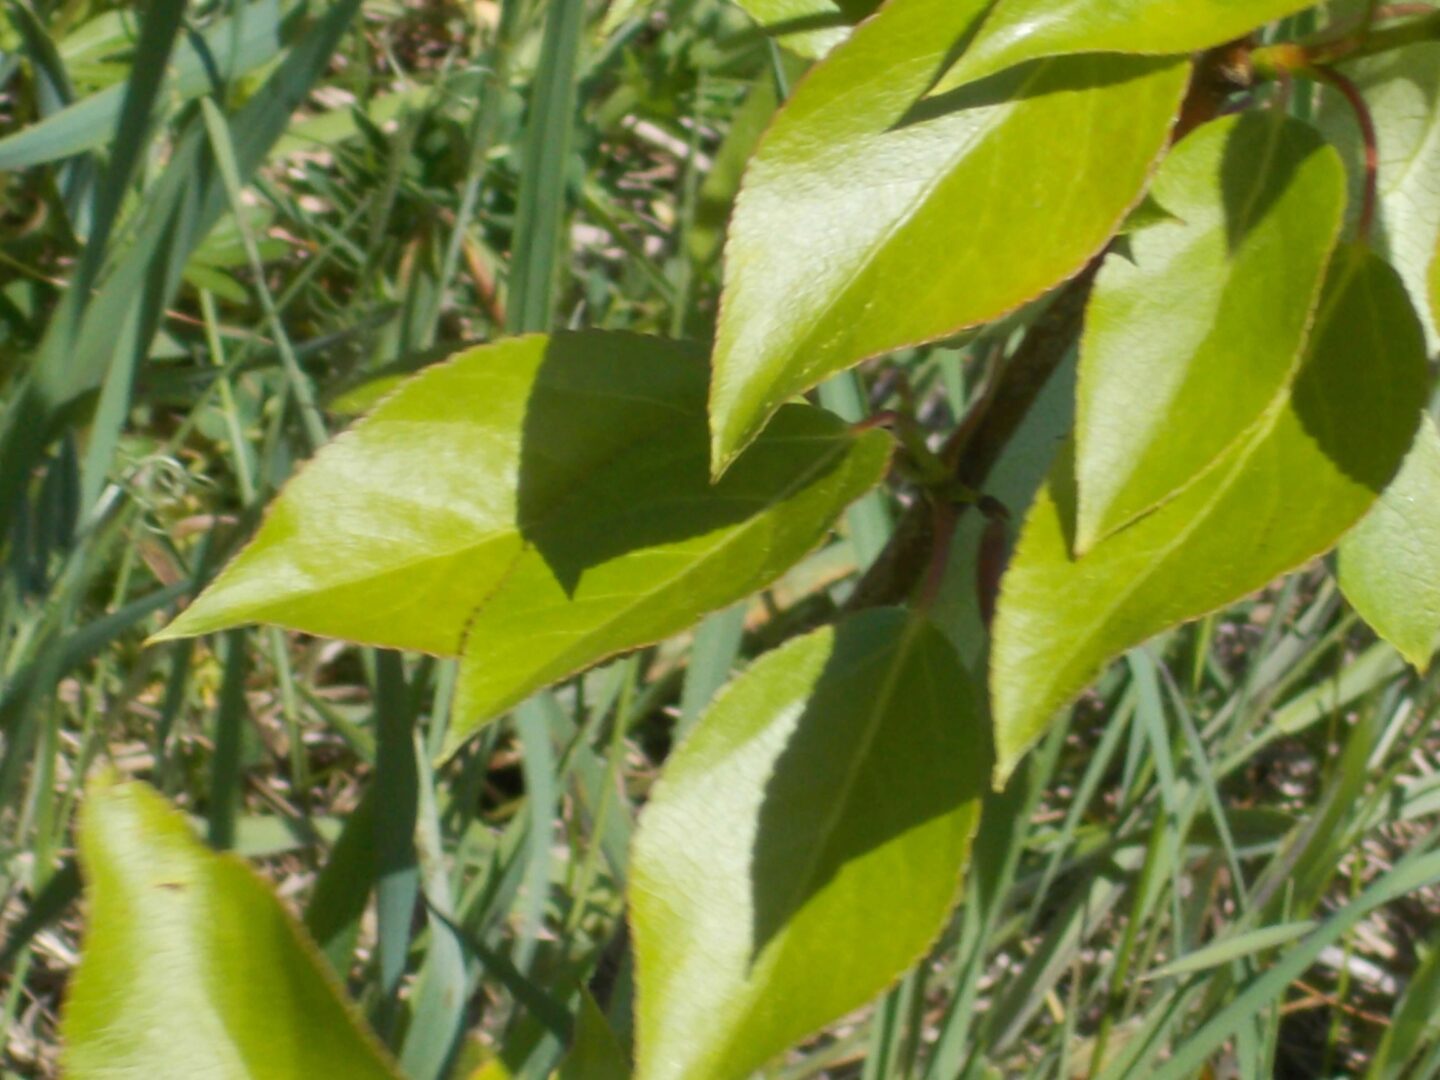 Image of green tree leaves